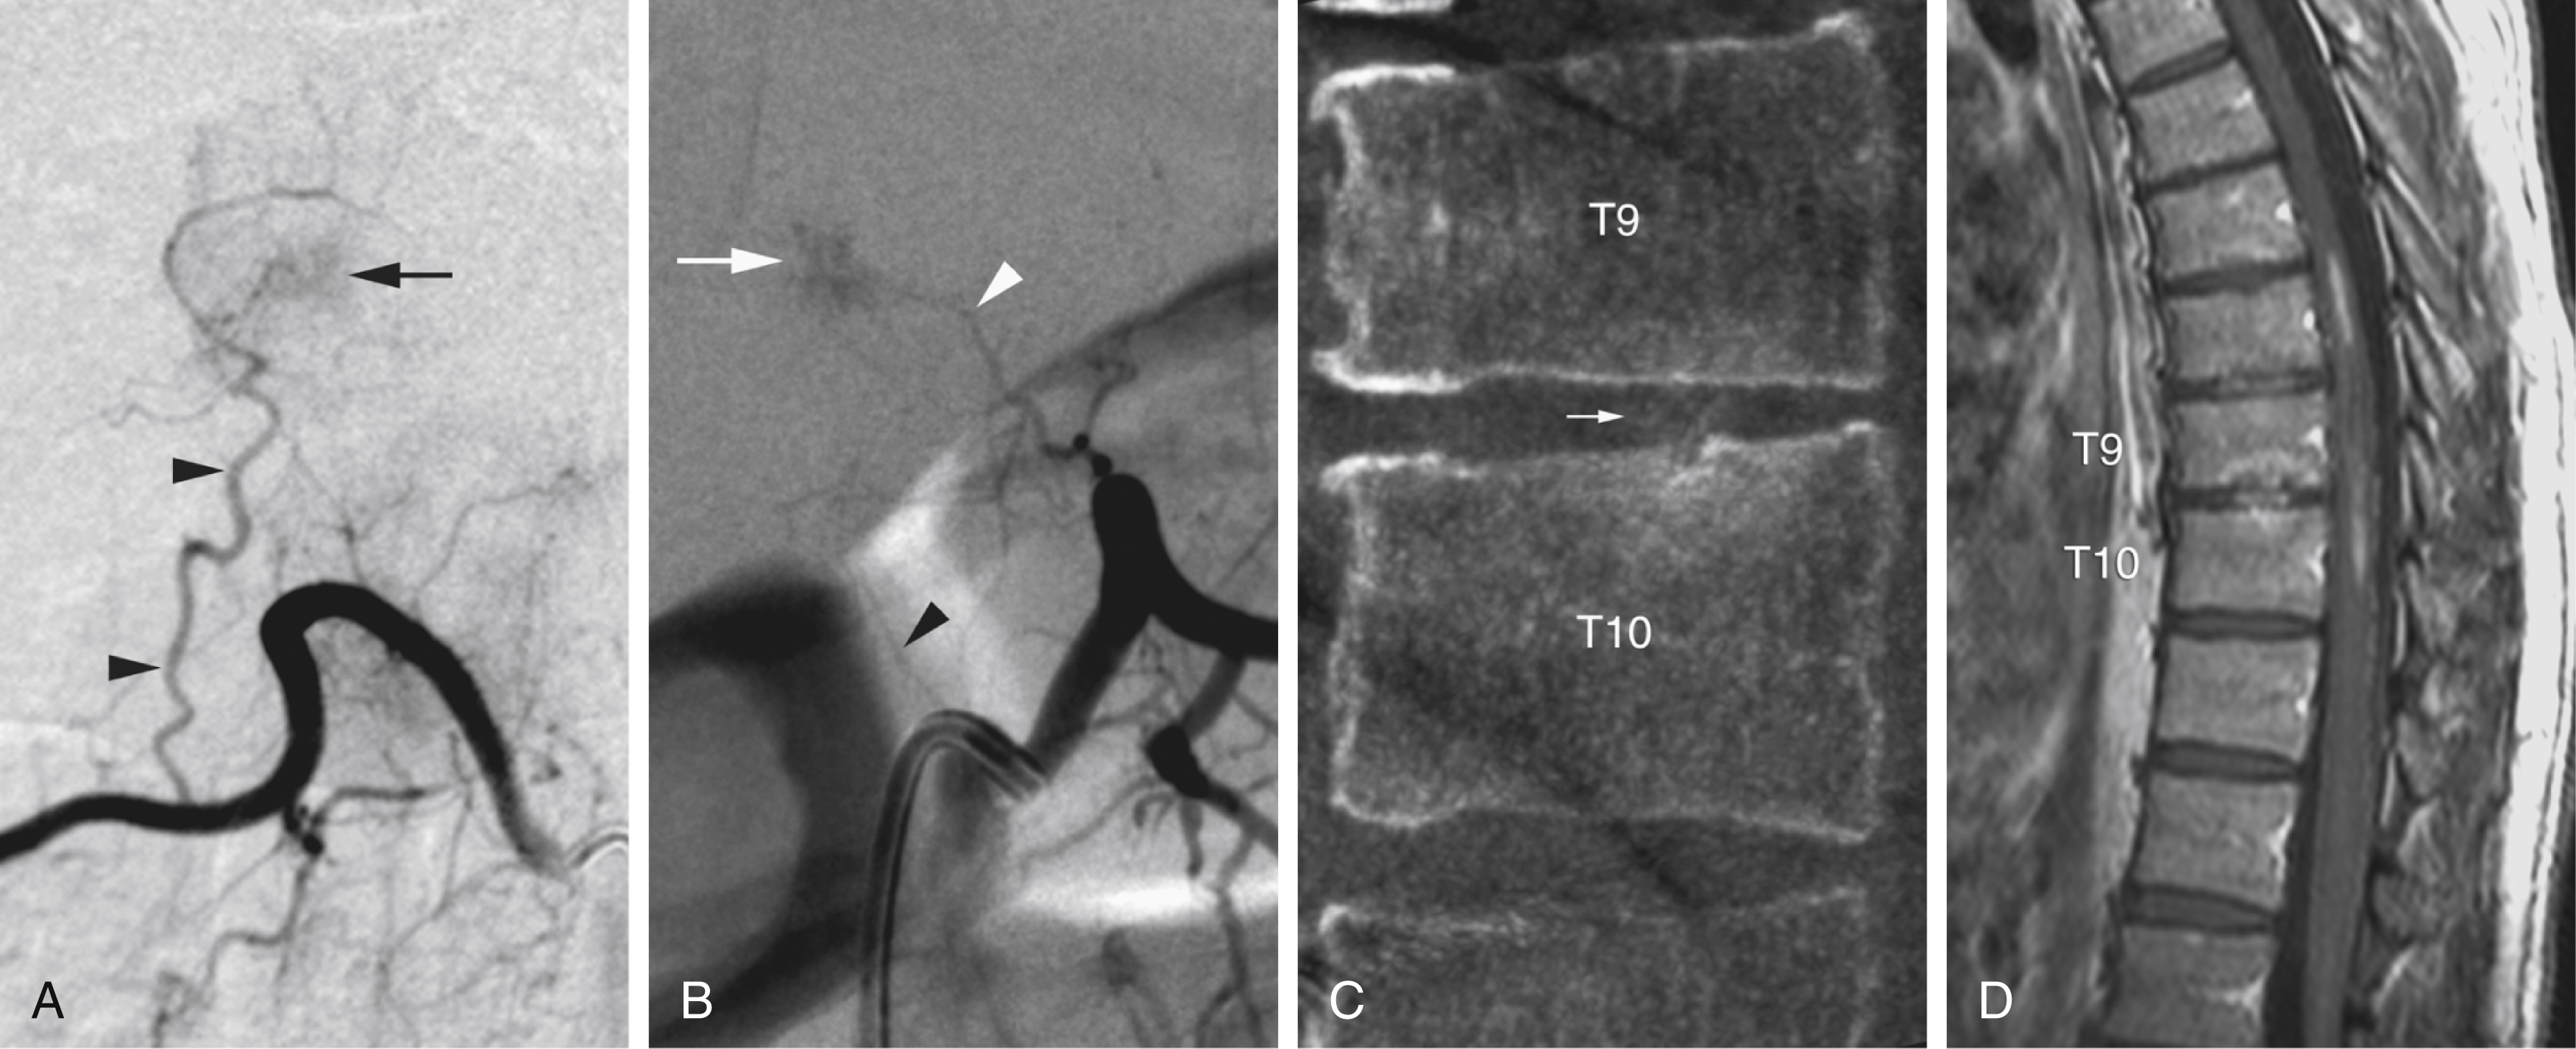 Fig. 57.13, Abnormal vertebral blushes. (A) Right L1 angiogram in patient with renal cell carcinoma. Paravertebral longitudinal anastomosis ( arrowheads ) opacifies metastatic lesion in lower aspect of T12 ( arrow ). (B) Similar image obtained during left T10 injection in patient with spinal cord hemorrhage. Here, abnormal blush ( arrow ) is opacified by superior osseous branch from internal segmental artery stem ( white arrowhead ) and corresponds to a Schmorl node. (C) Left T10 flat-panel catheter angiotomography confirms location of blush within T9–T10 intervertebral space ( small arrow ), correlating with a Schmorl node, documented by magnetic resonance imaging (D). Blush can be distinguished from normal cluster of posteromedian osseous branches by its location (away from basivertebral foramen) and by its feeding artery, distinct from retrocorporeal artery.